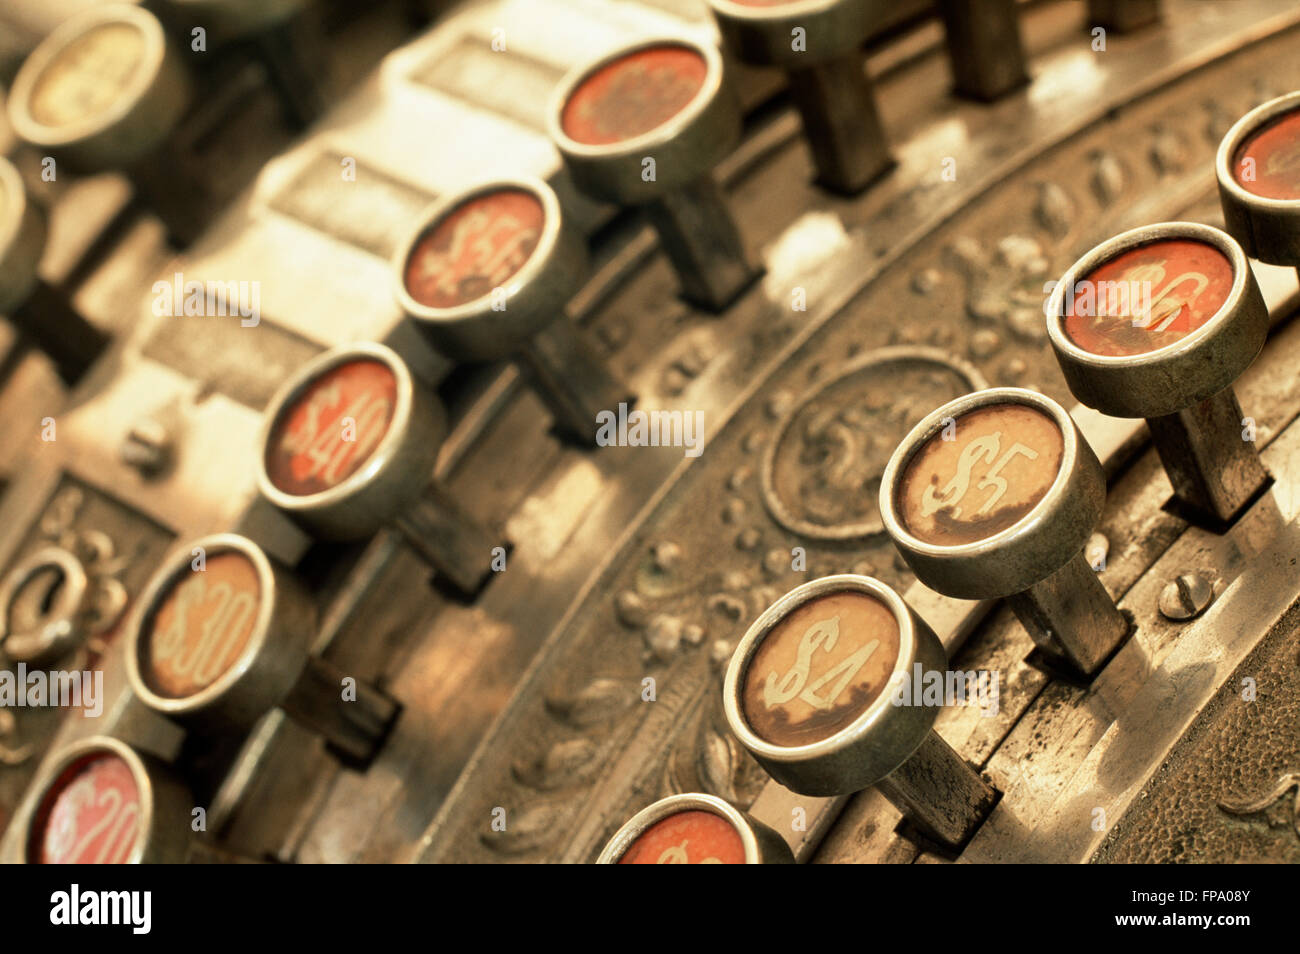 Close-up of the Keys of a Vintage Cash Register Stock Photo